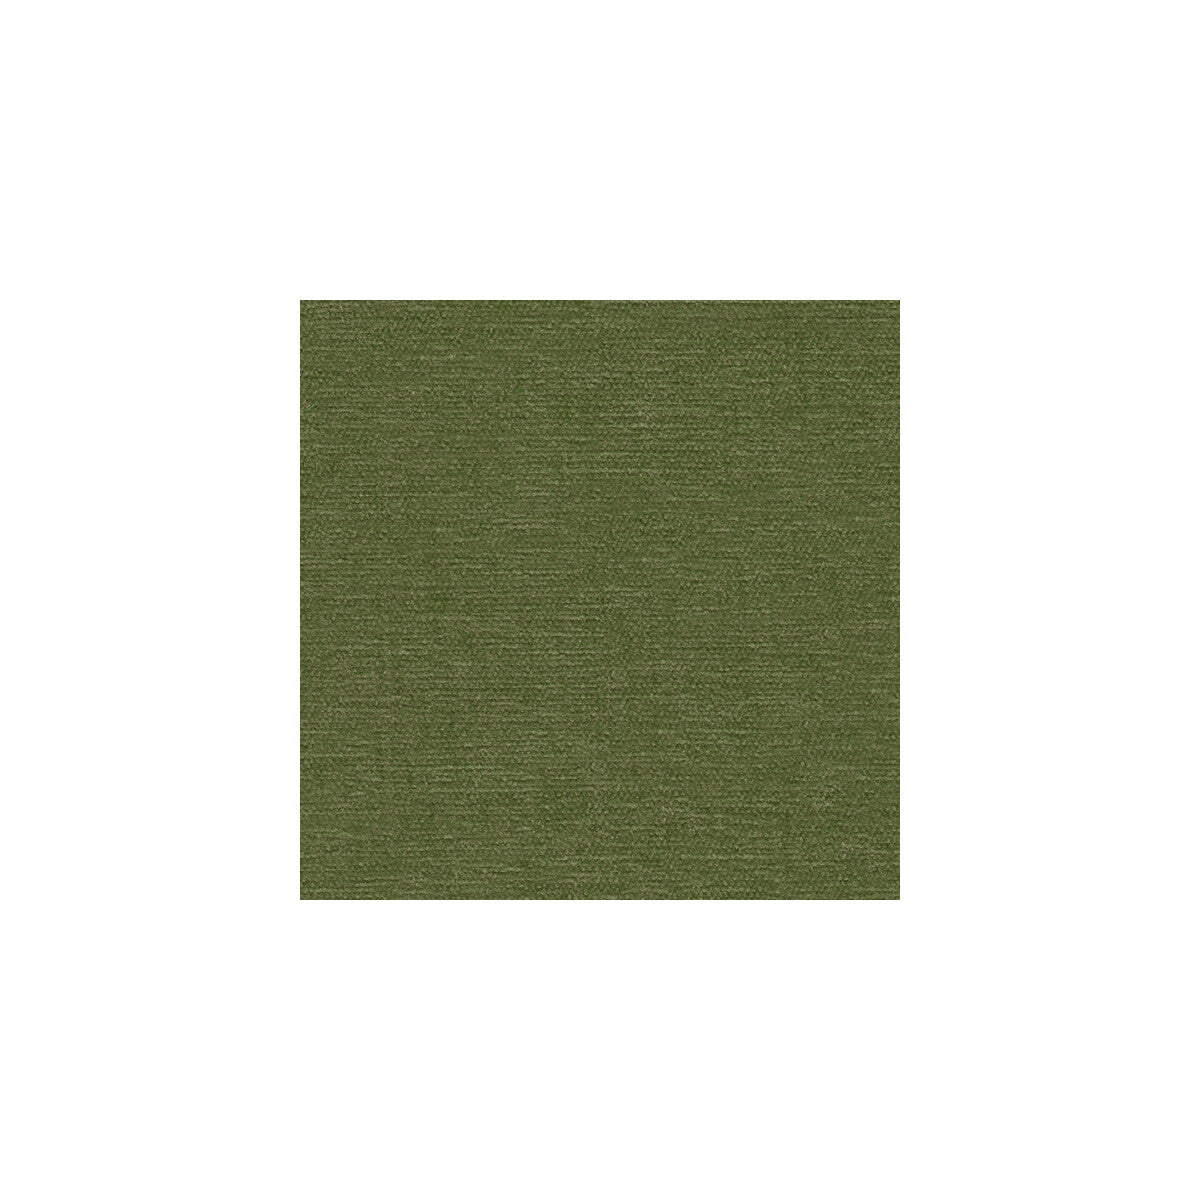 Kravet Contract fabric in 32148-3333 color - pattern 32148.3333.0 - by Kravet Contract